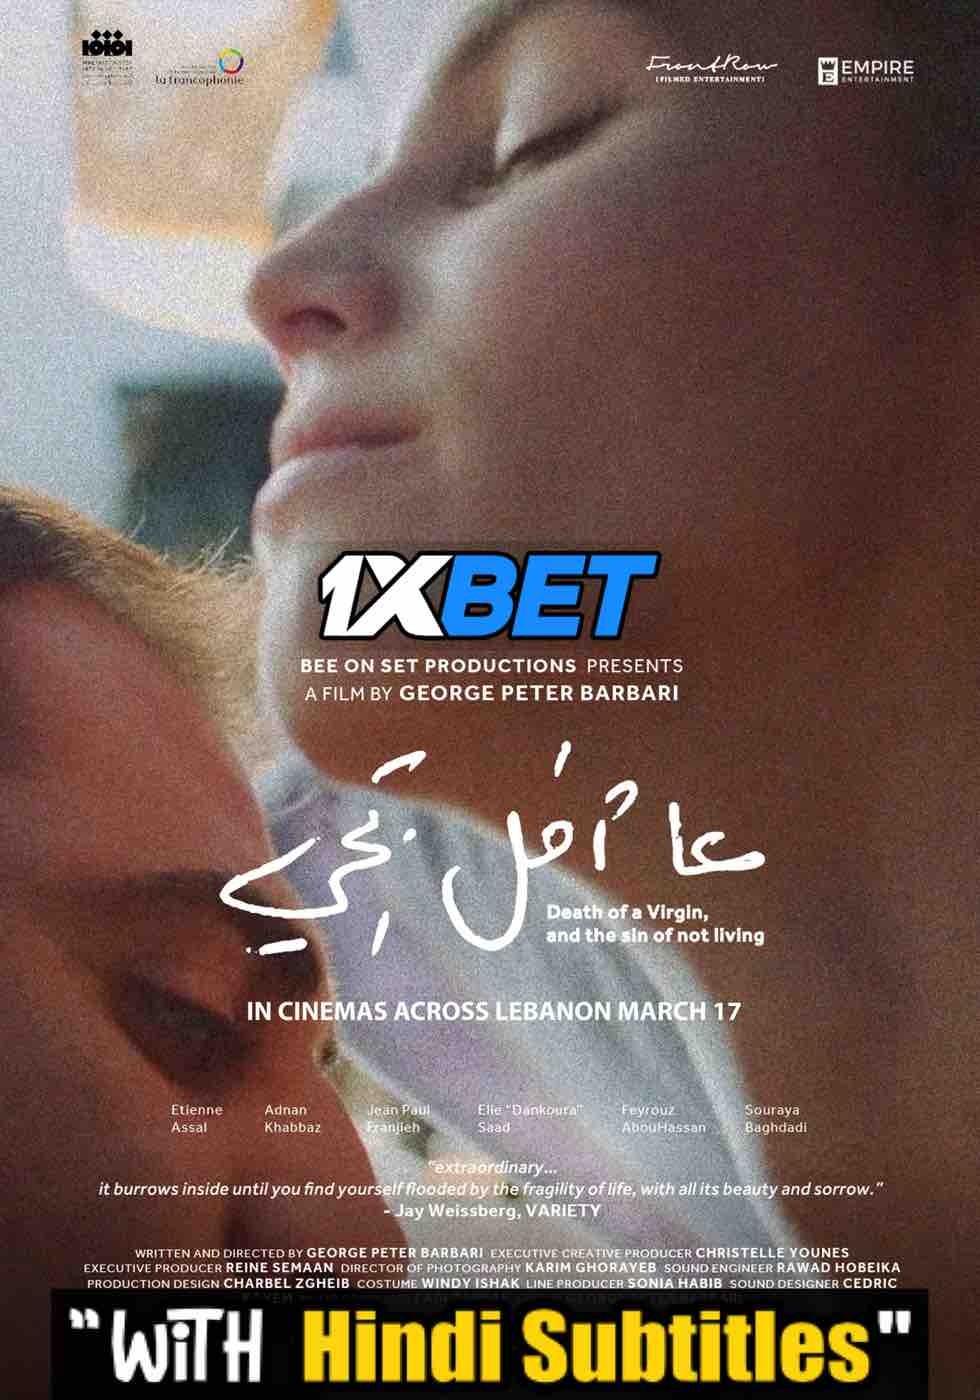 Watch Death of a Virgin and the Sin of Not Living (2021) Full Movie [In Arabic] With Hindi Subtitles  WEBRip 720p Online Stream – 1XBET